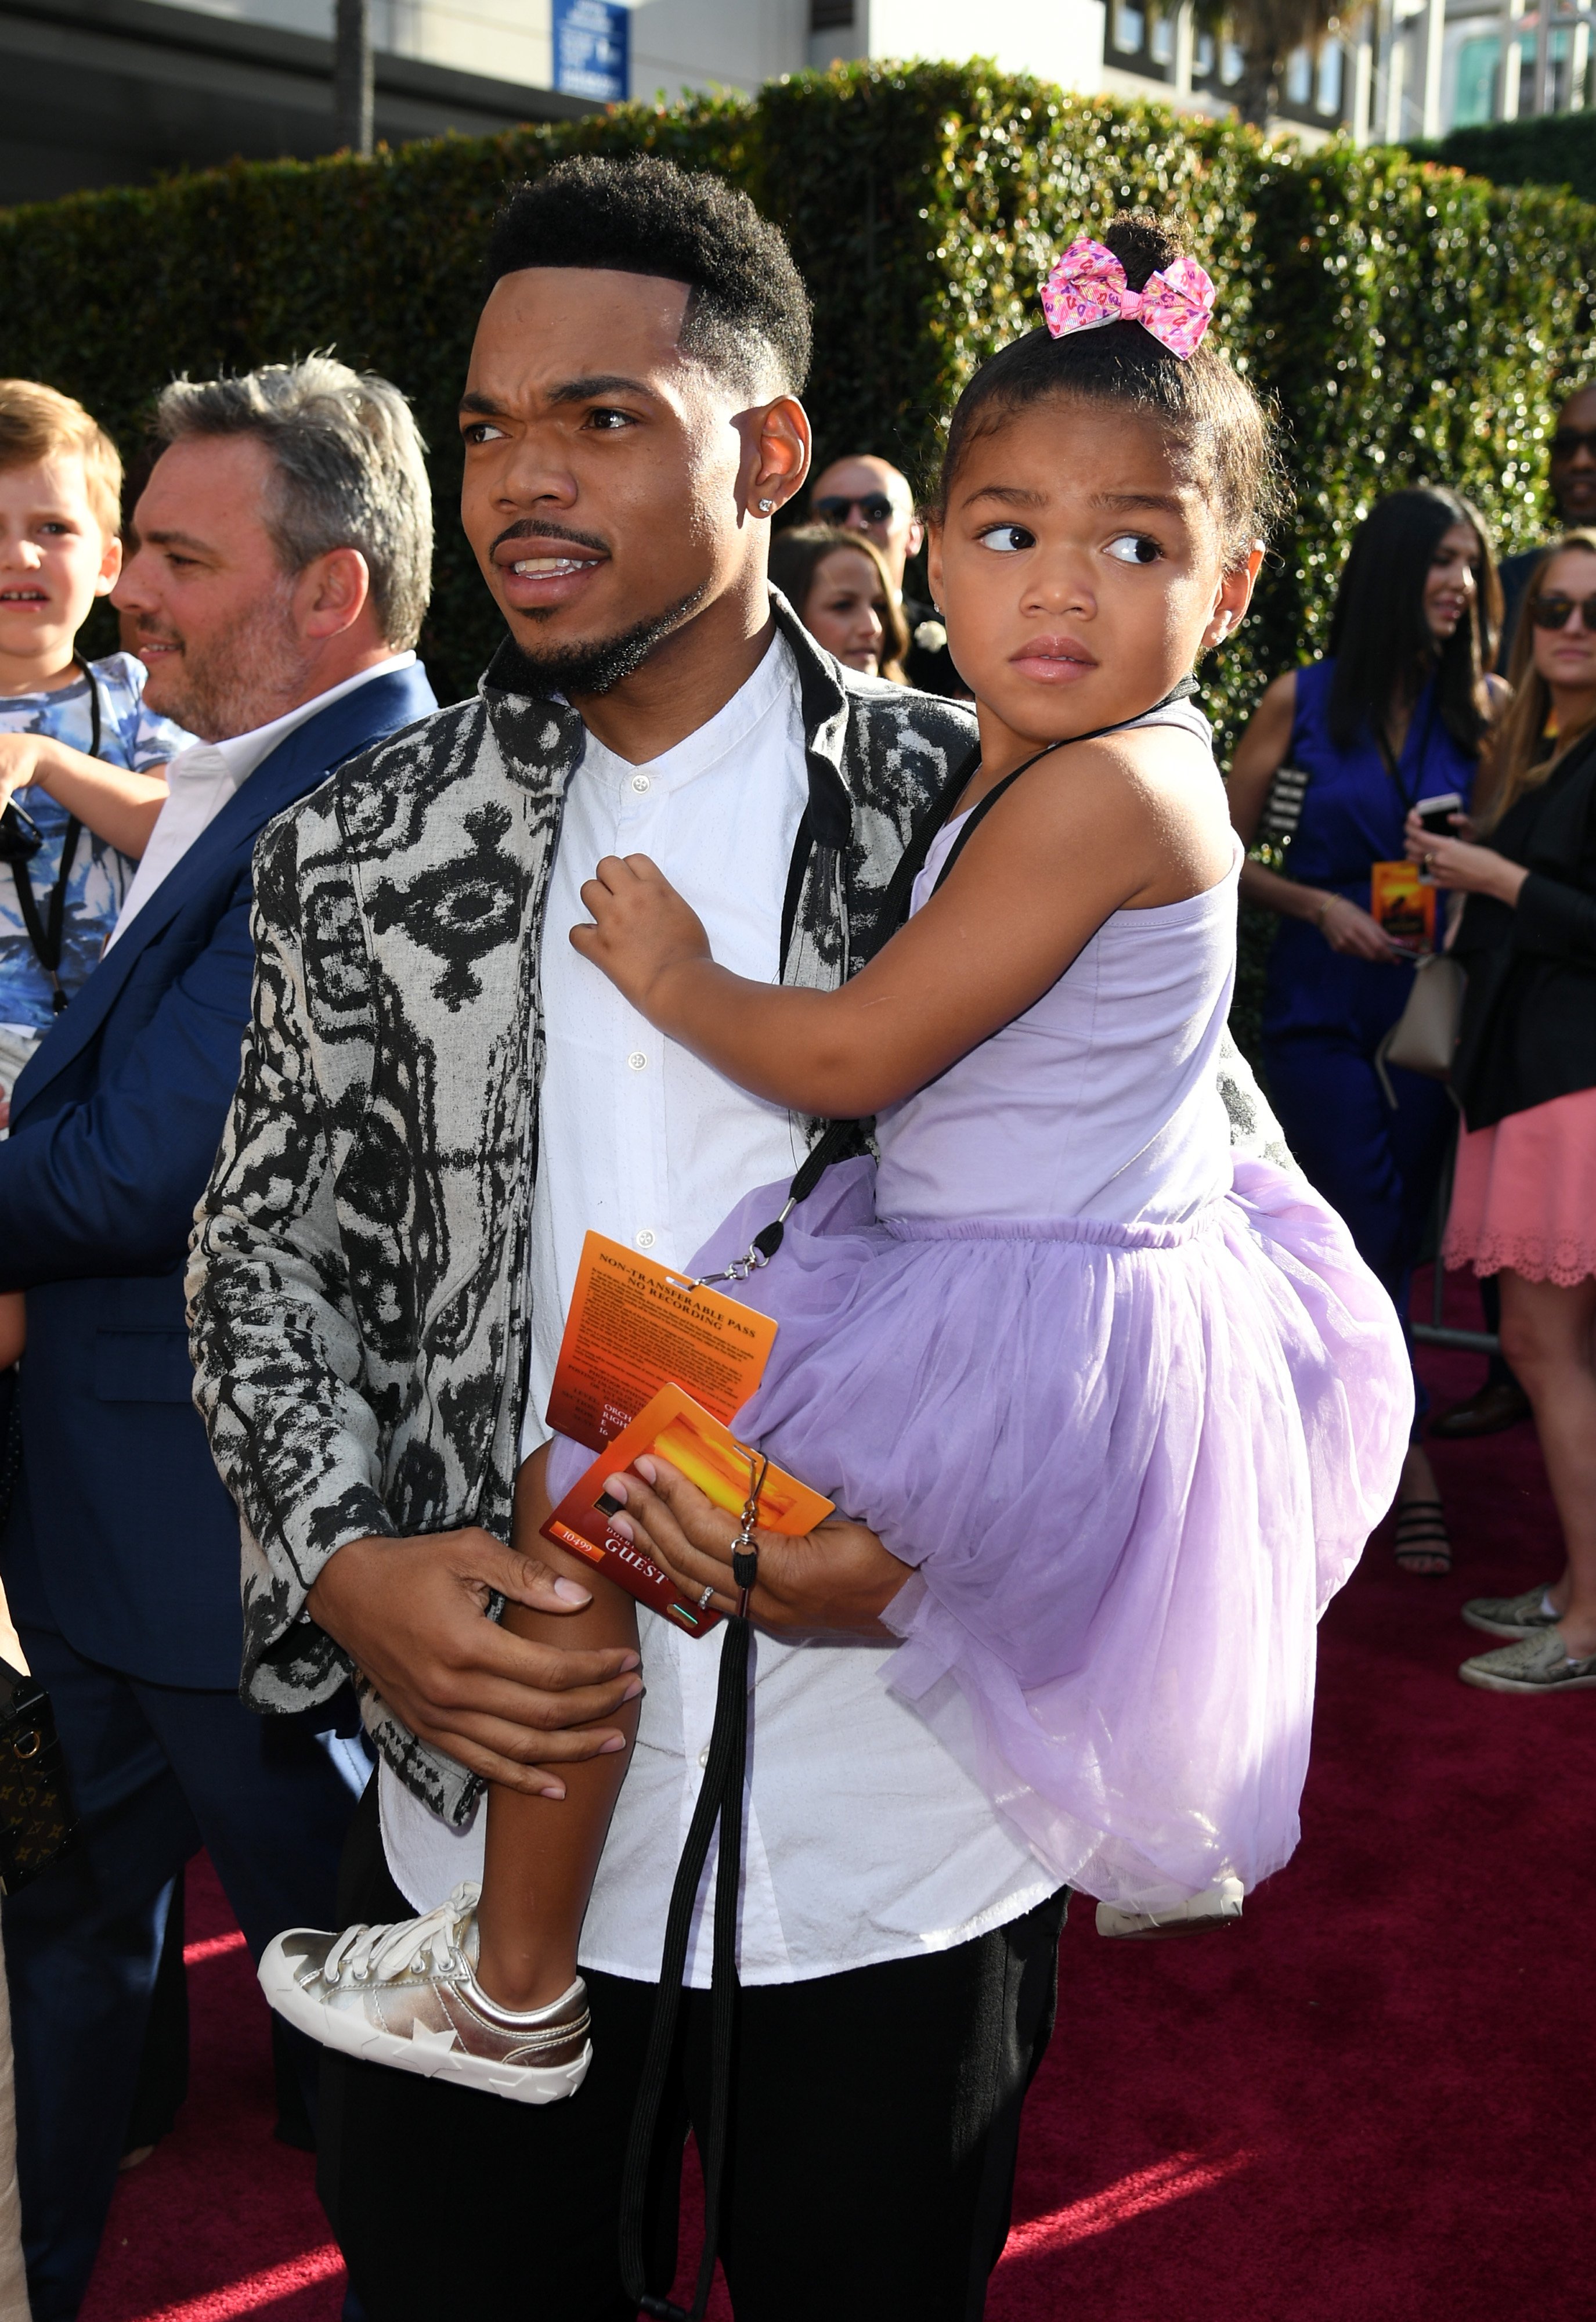 Chance The Rapper and Kensli Bennett at the premiere of Disney's "The Lion King" on July 9, 2019, in Hollywood, California. | Source: Getty Images